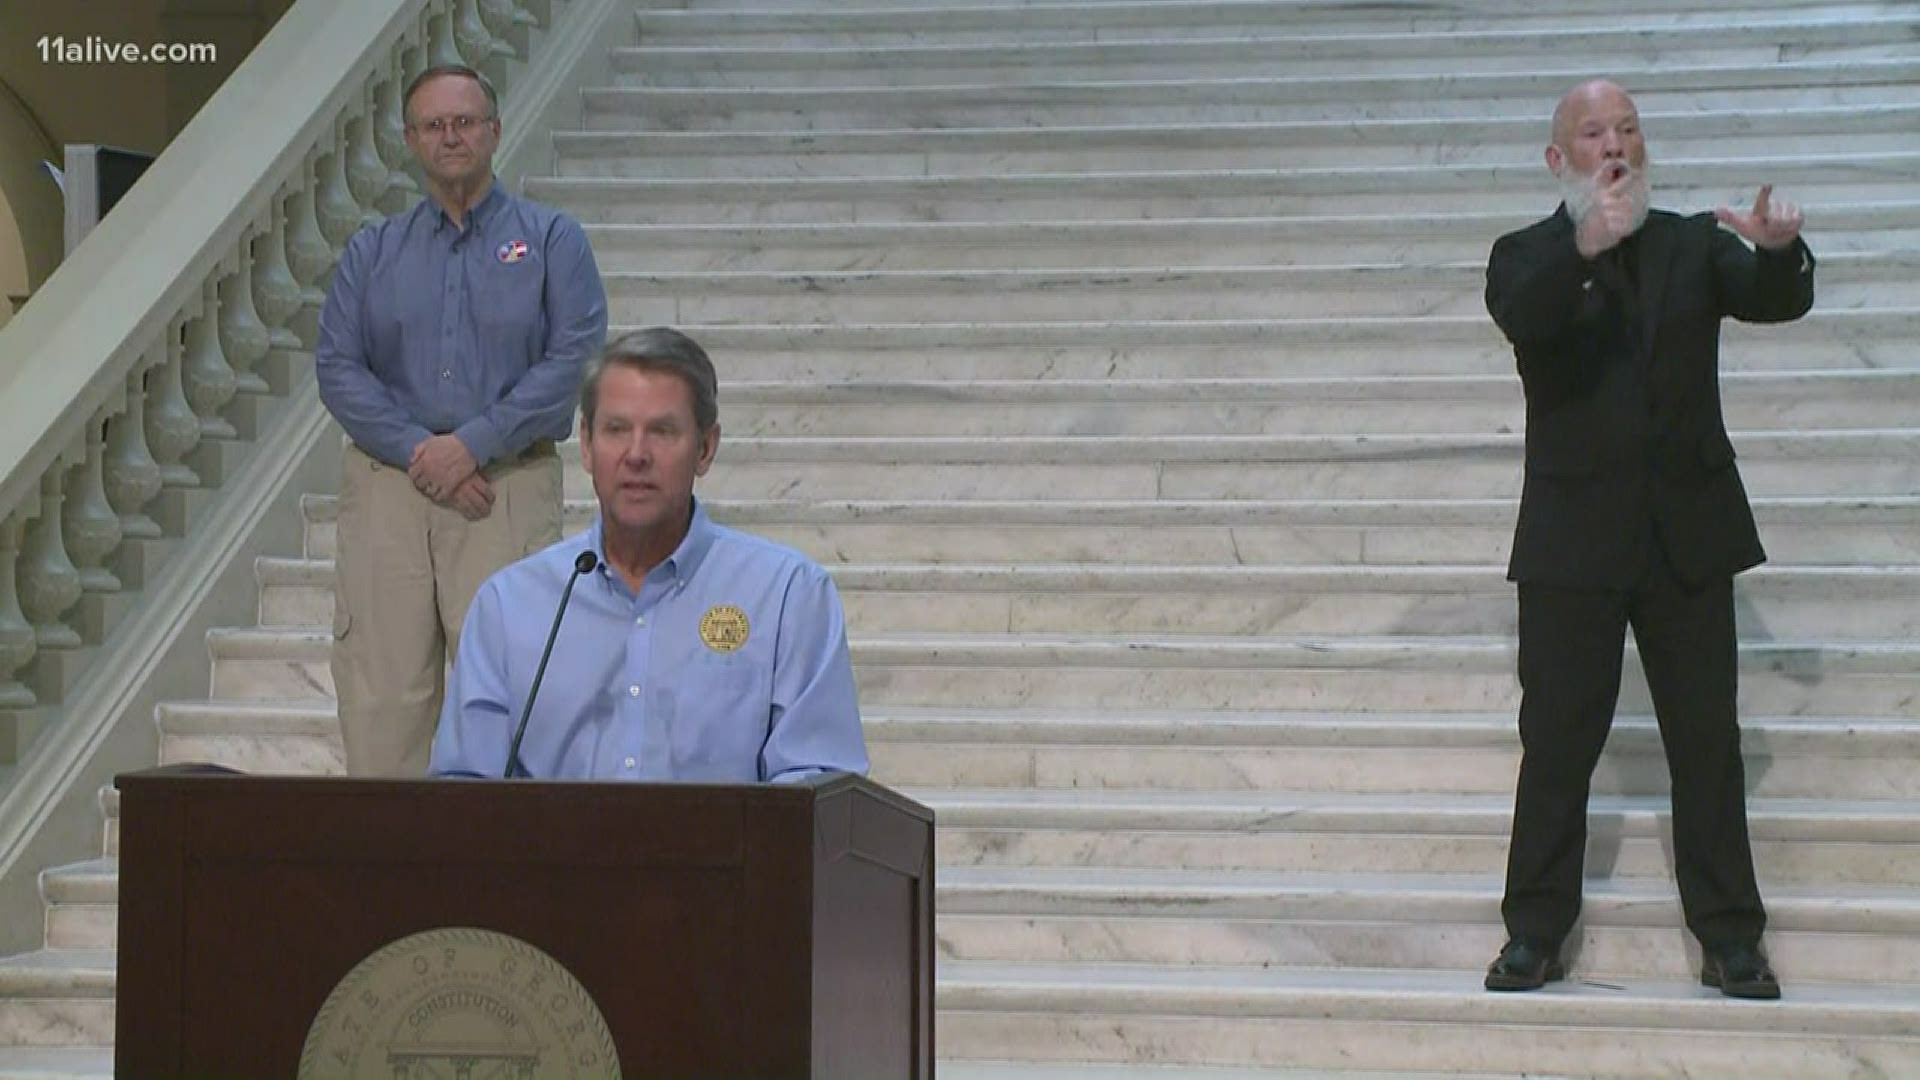 Gov. Kemp extends stay-at-home order, activates 1,000 additional National Guard troops and suspends short-term vacation rentals.